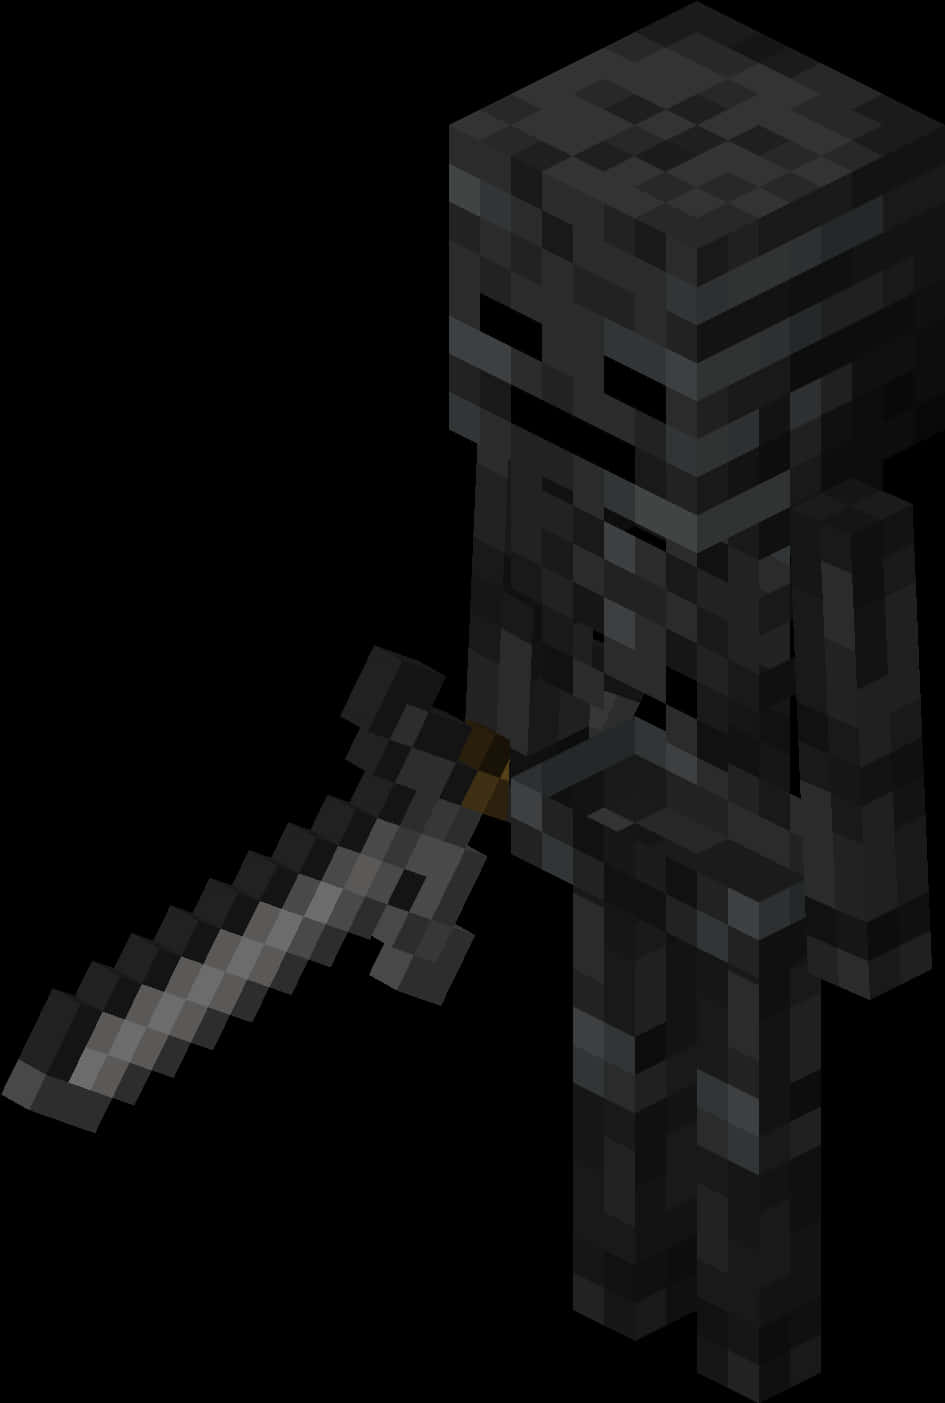 A Pixelated Figure Holding A Sword